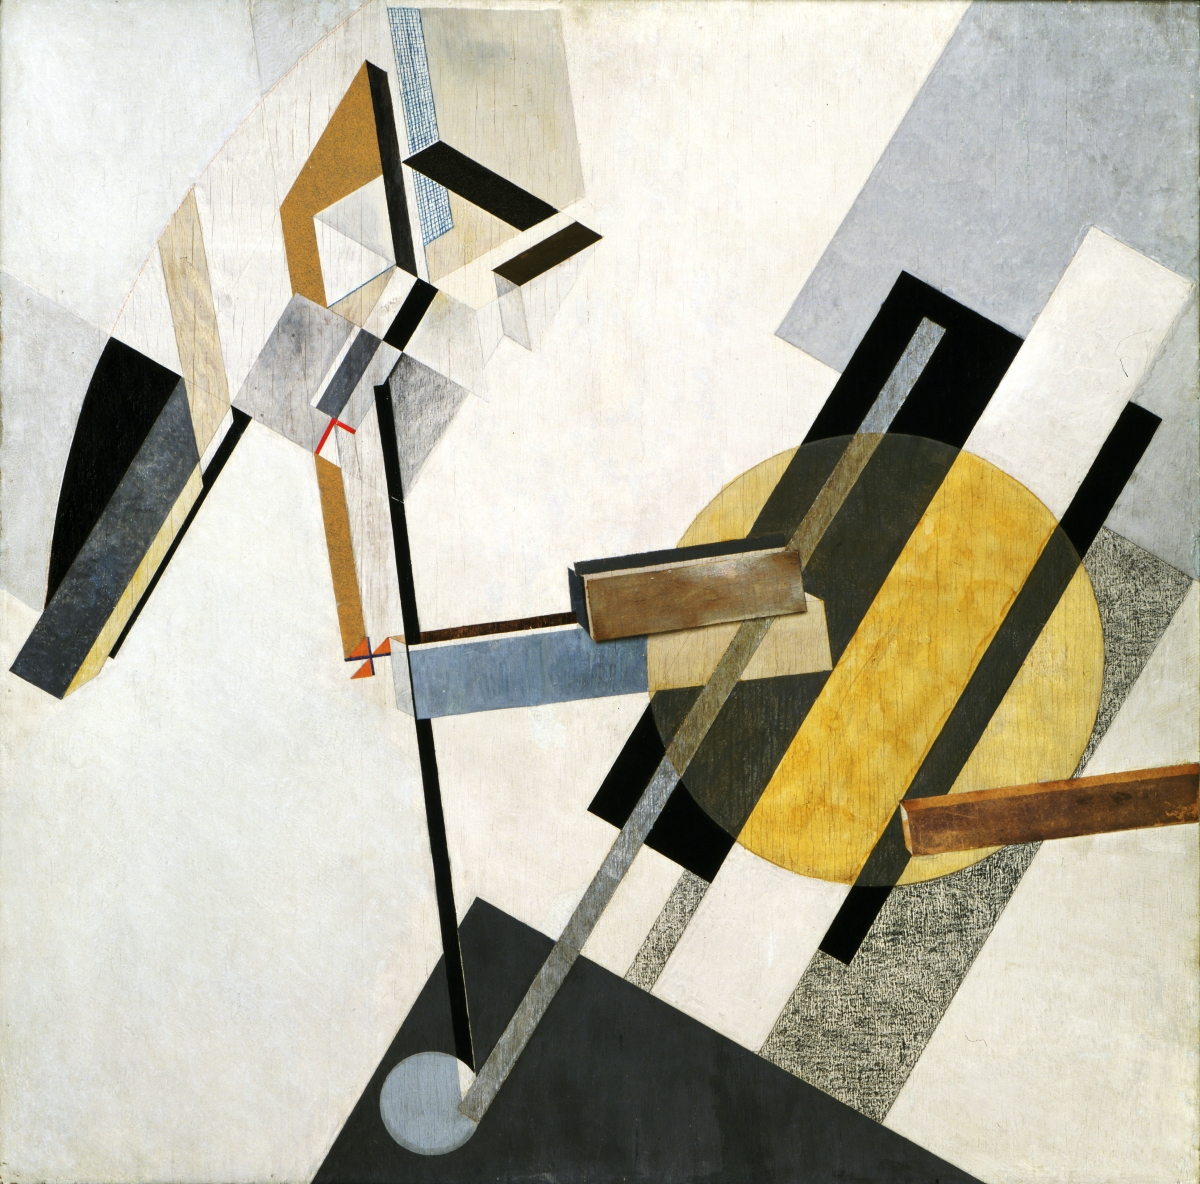 El Lissitzky (Russian, 1890–1941), “Proun 19D,” 1920 or 1921; gesso, oil, varnish, crayon, colored papers, sandpaper, graph paper, cardboard, metallic paint and metal foil on plywood, 38-  by 38¼ inches. The Museum of Modern Art, New York. Katherine S. Dreier Bequest.